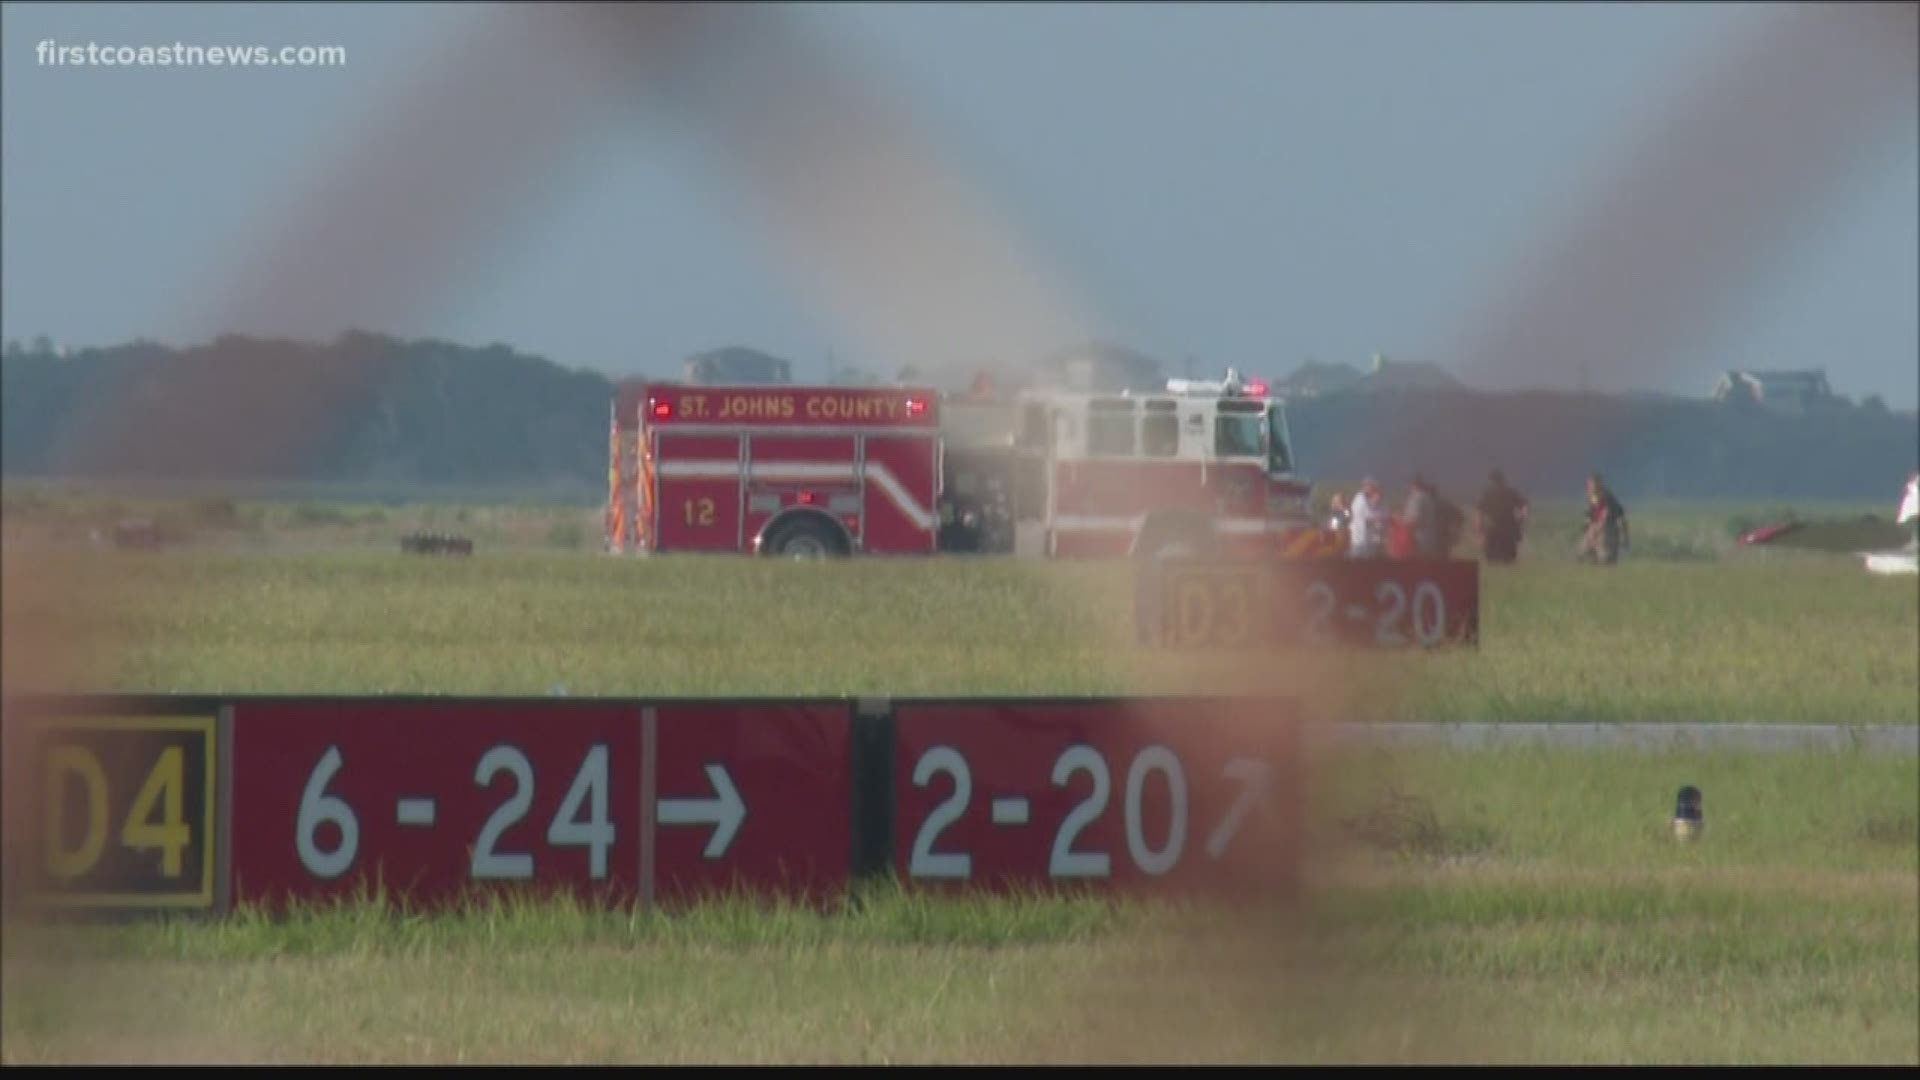 A plane carrying two people crashed at the Northeast Florida Regional Airport, according to the Florida Highway Patrol.